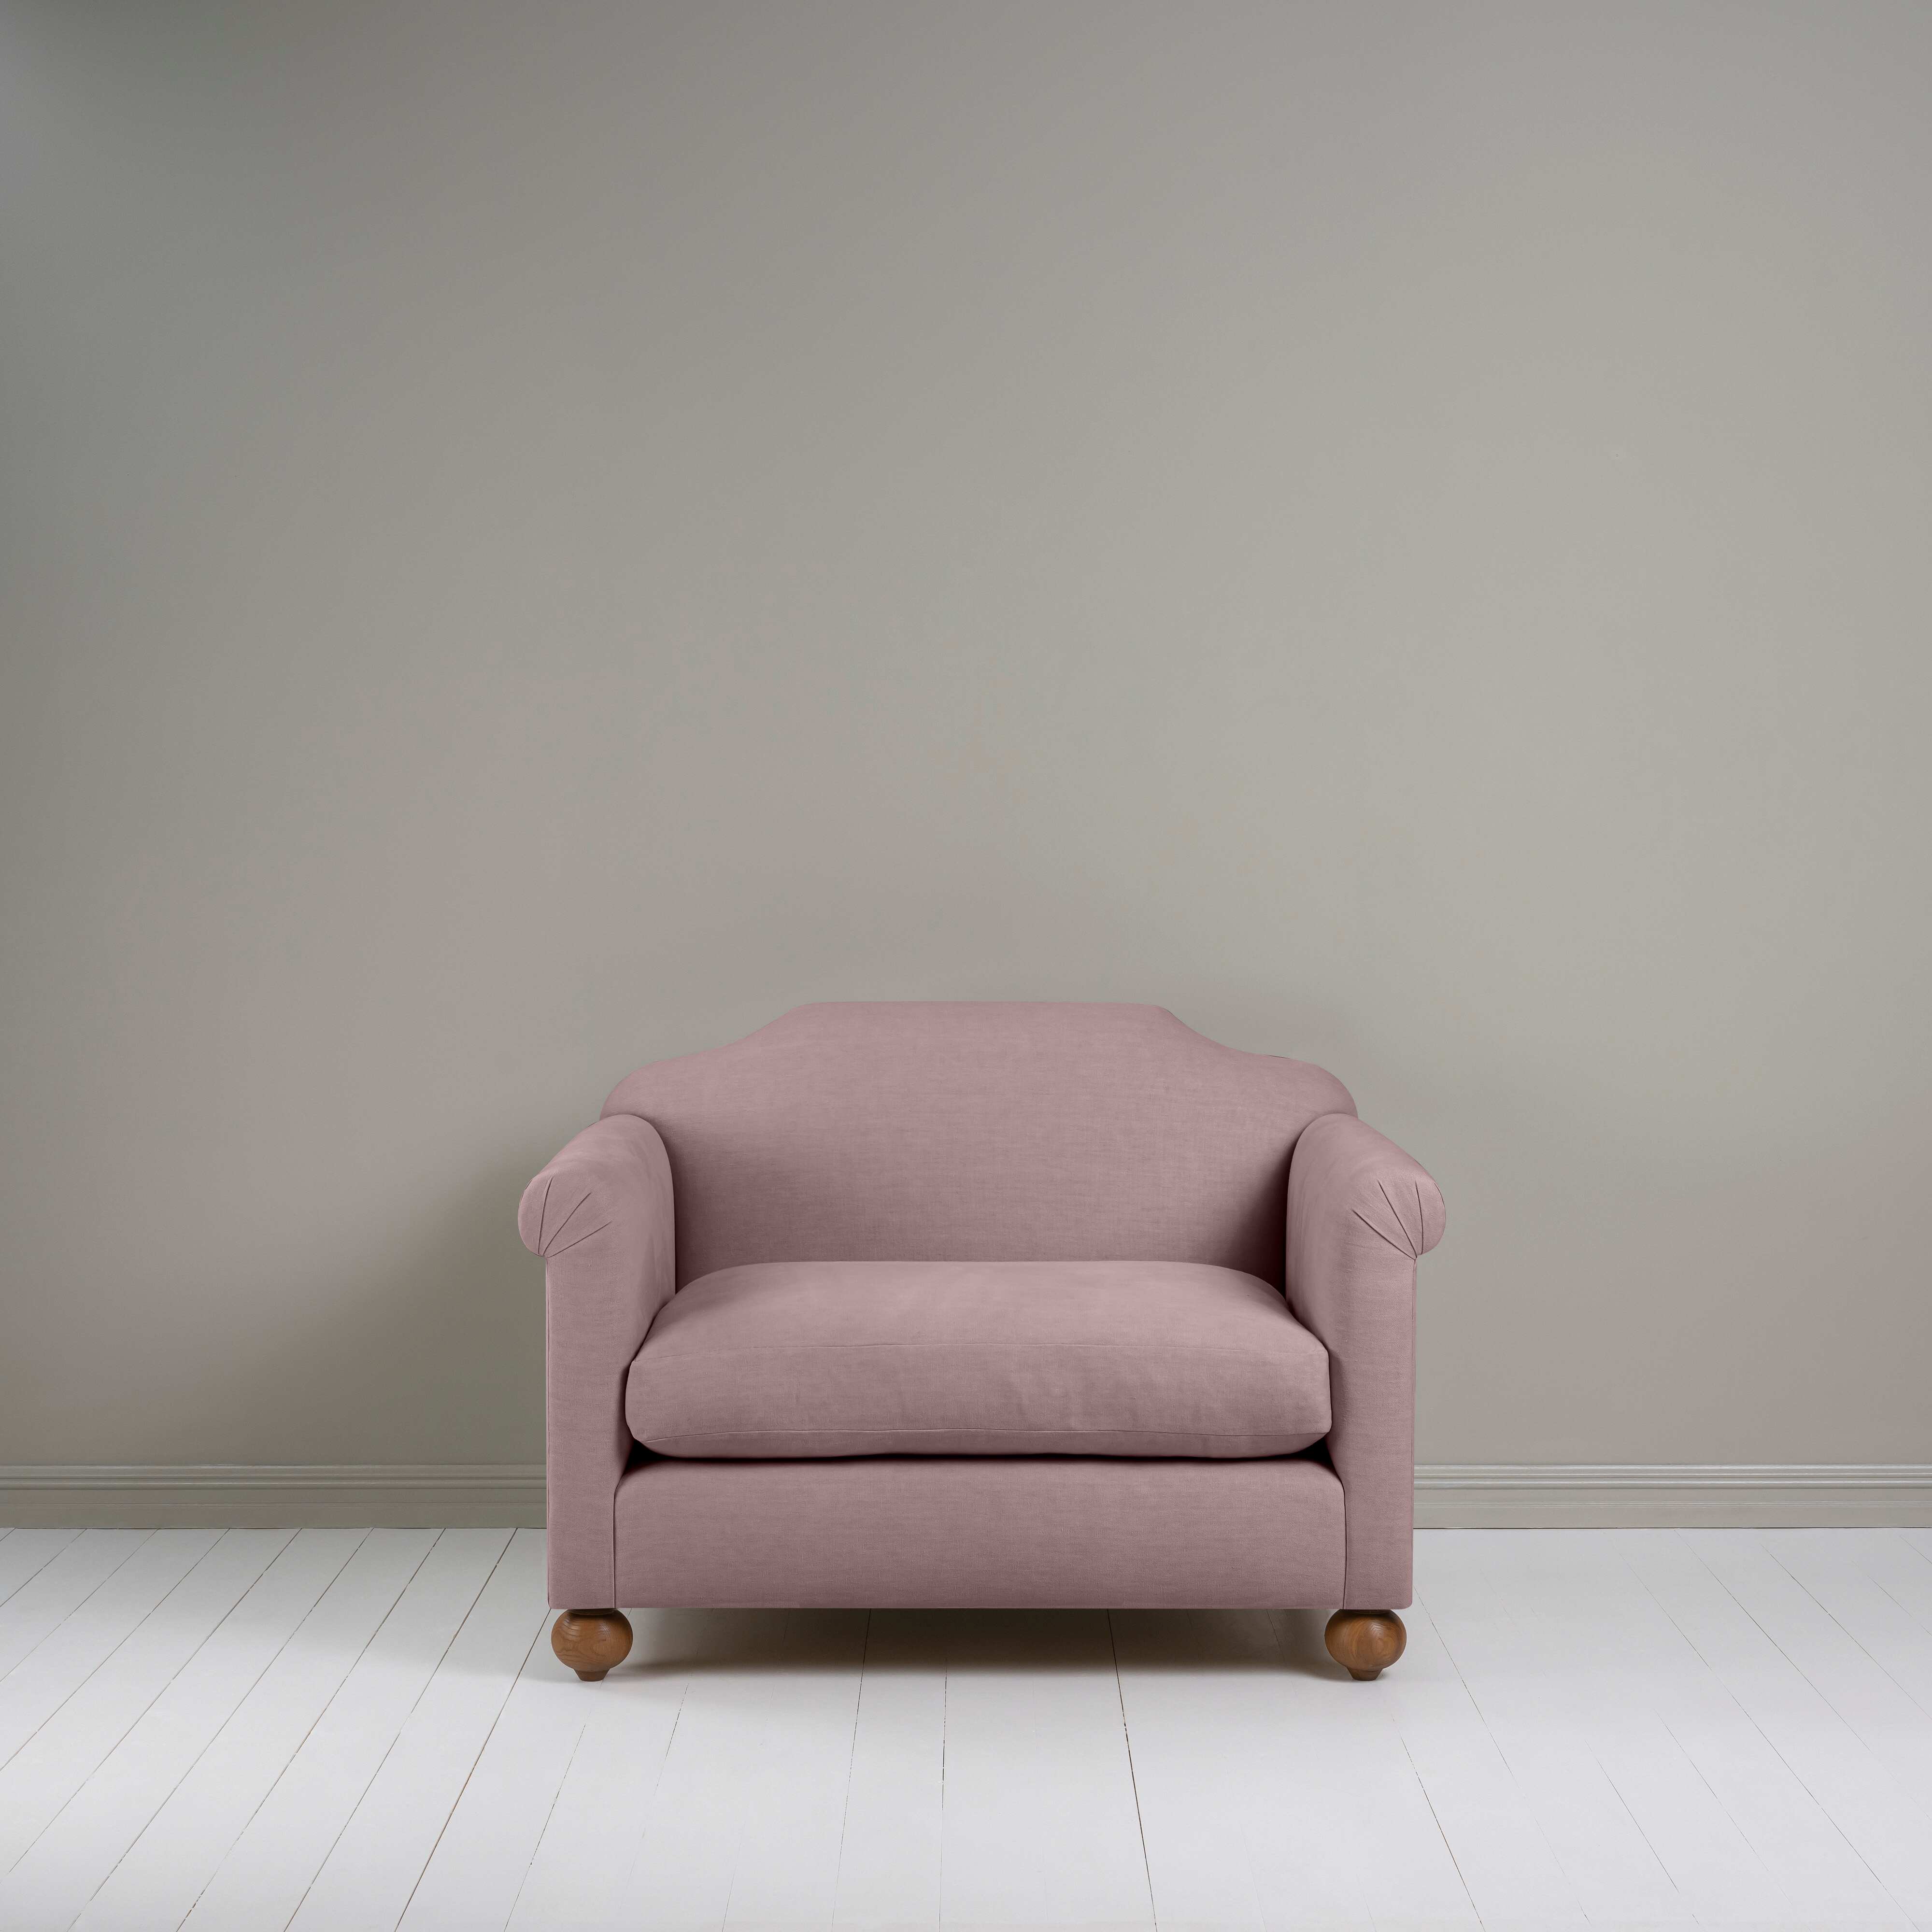  Dolittle Love Seat in Laidback Linen Heather 